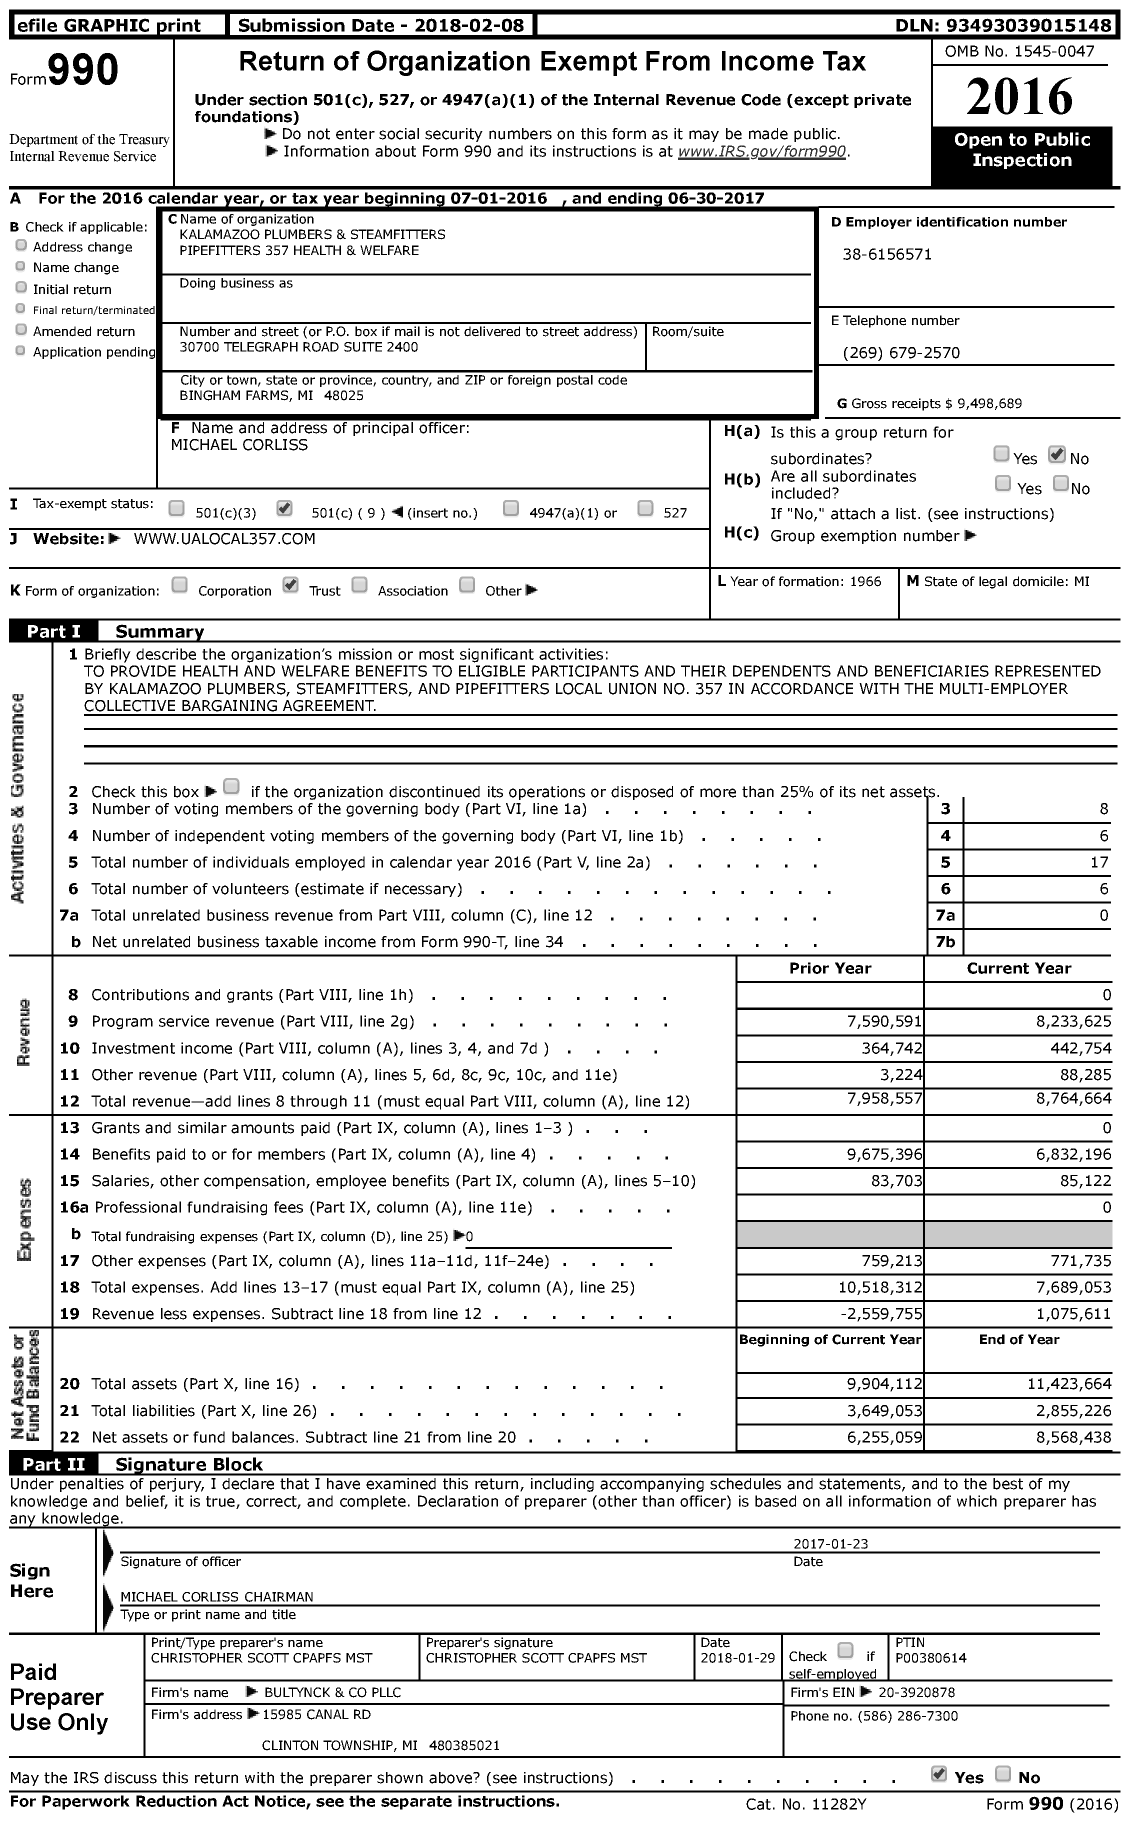 Image of first page of 2016 Form 990 for Kalamazoo Plumbers and Steamfitters Pipefitters 357 Health and Welfare